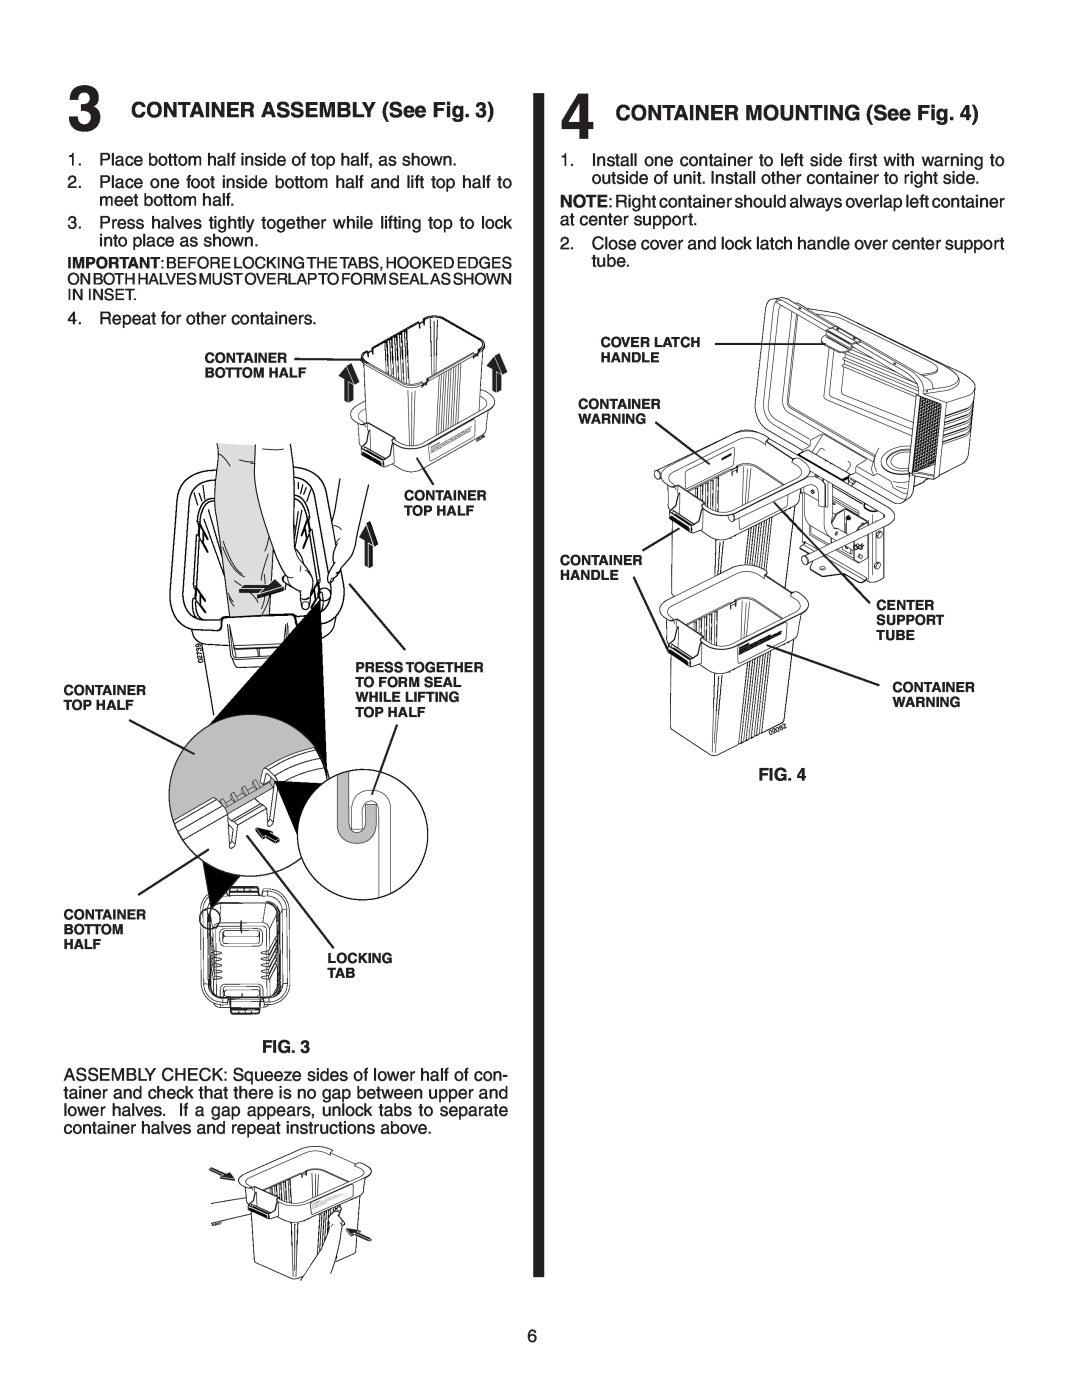 Poulan QC342A, 954 63 19-23, 532178476 owner manual CONTAINER ASSEMBLY See Fig, CONTAINER MOUNTING See Fig 